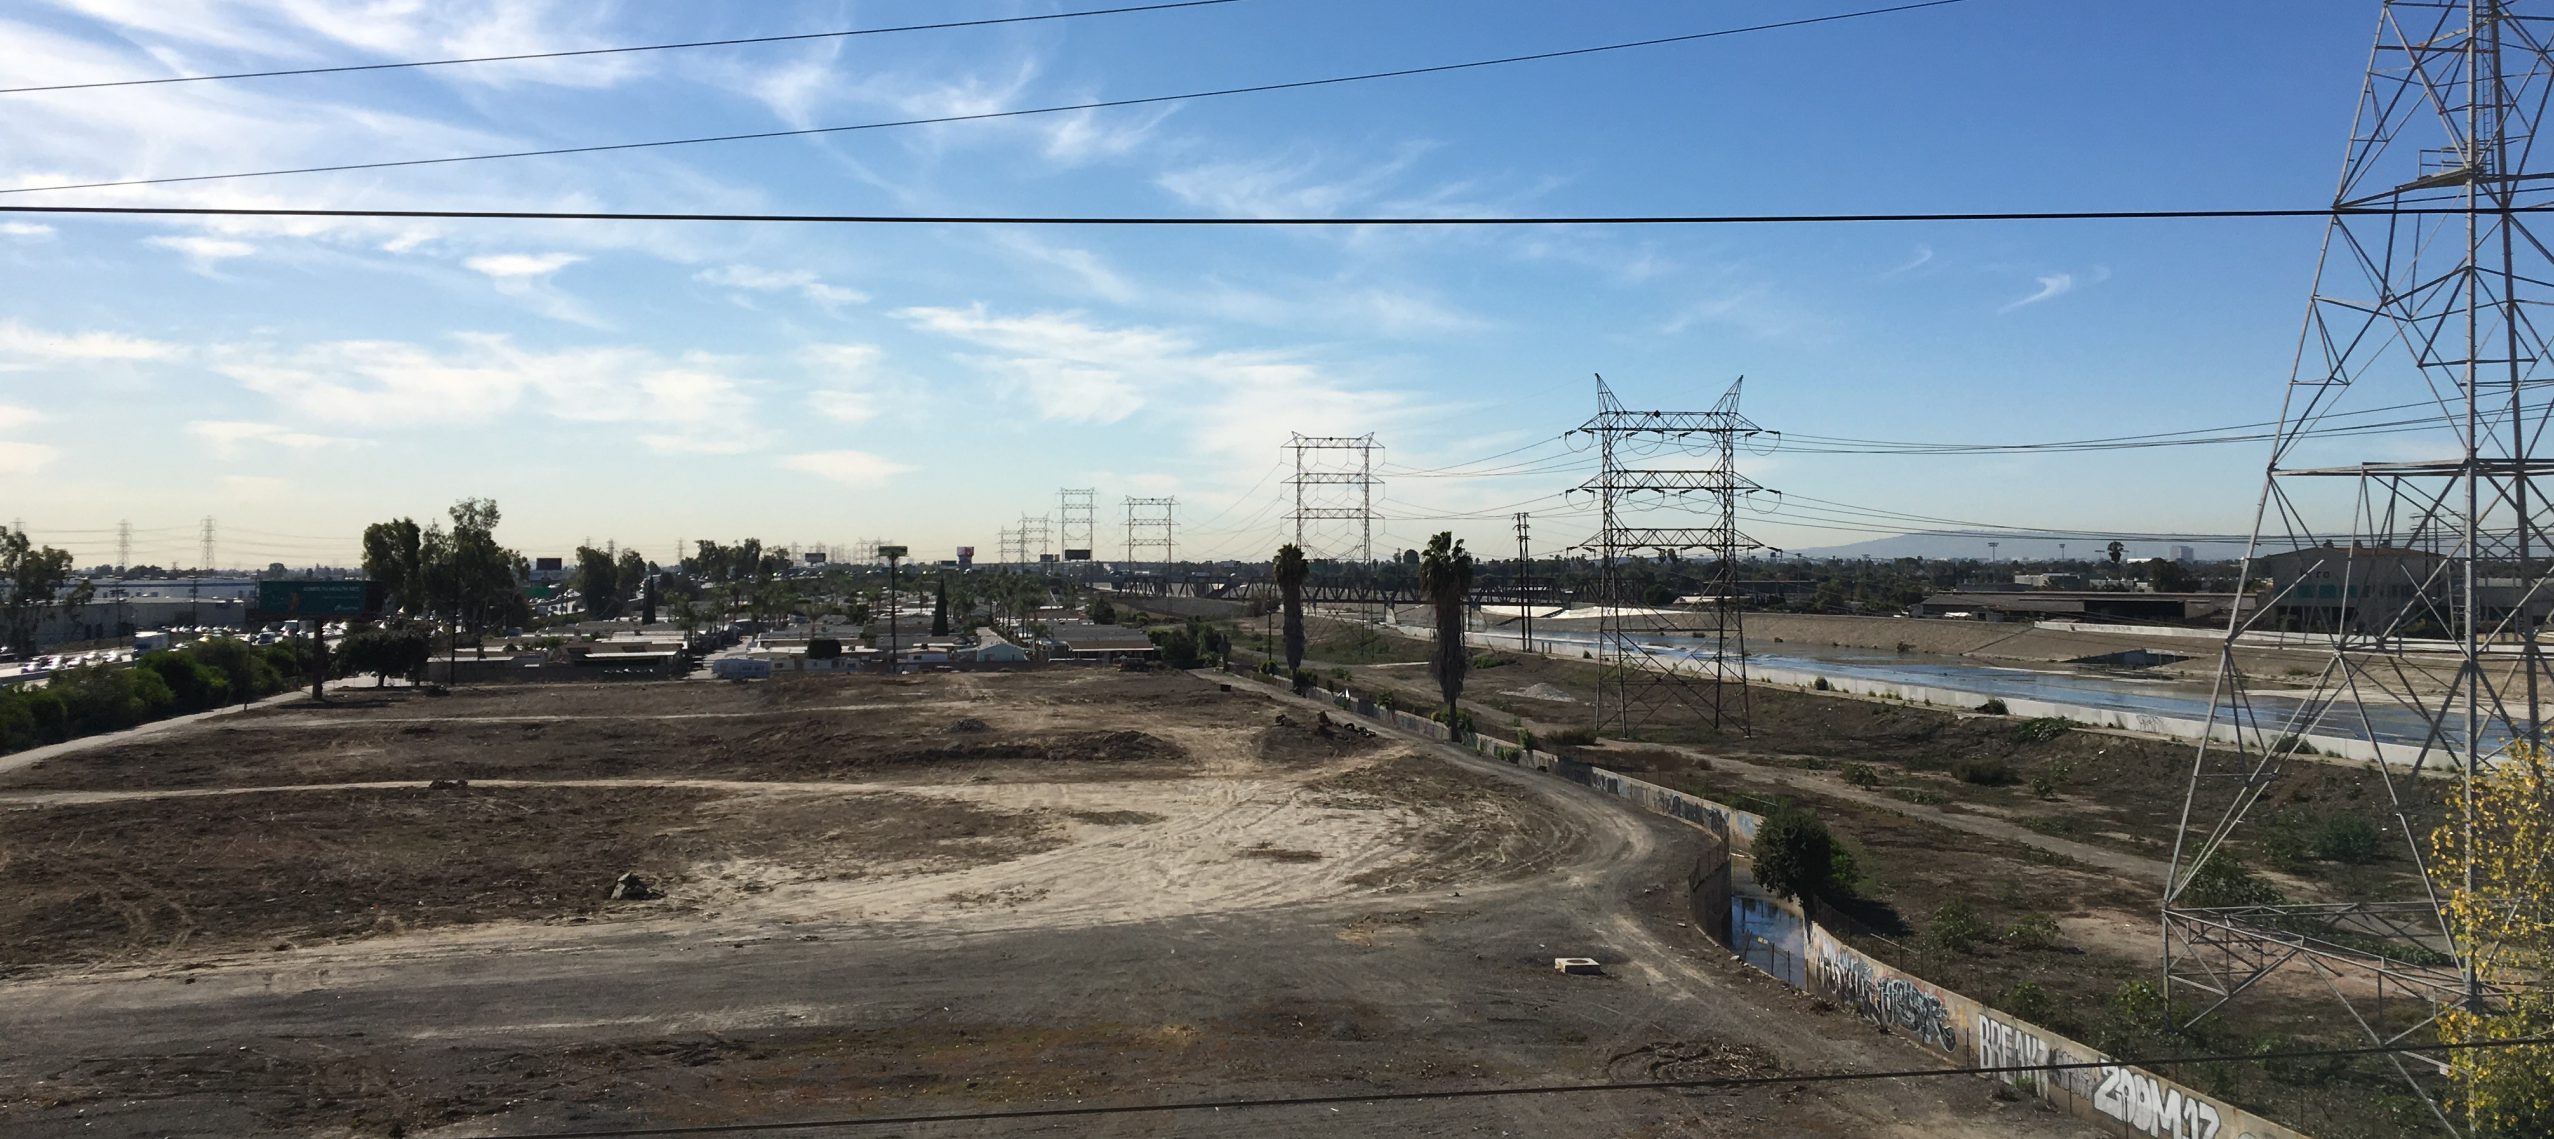 A view of a construction site with power lines.